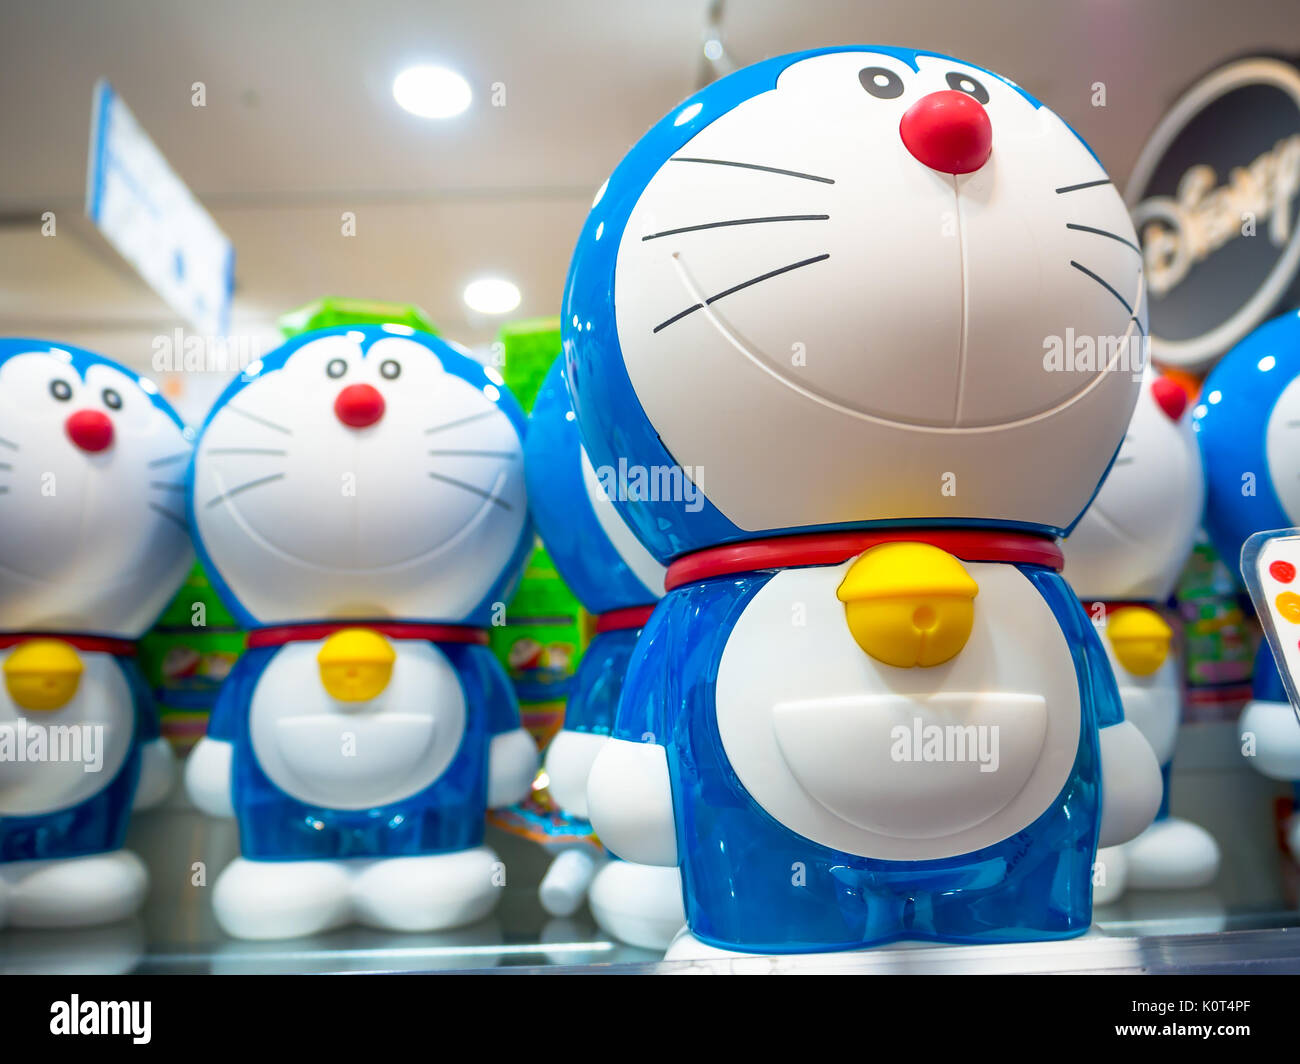 TOKYO, JAPAN JUNE 28 - 2017: Close up of assorted doraemon toy, located in a toy center in Tokyo Stock Photo